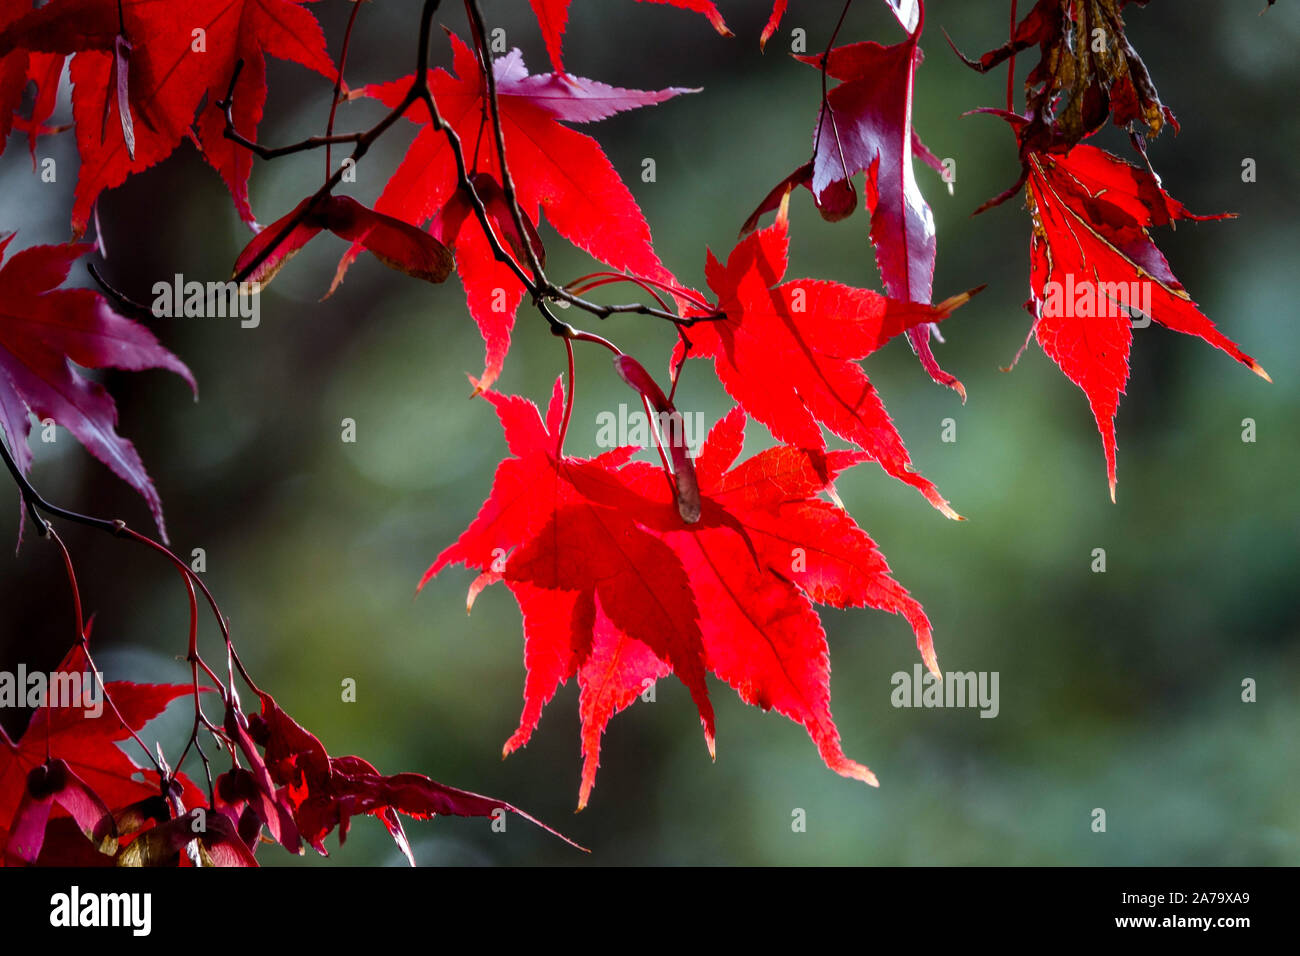 Rosso Giapponese Acero Acer Bloodgood rosso acero foglie autunno Foto Stock